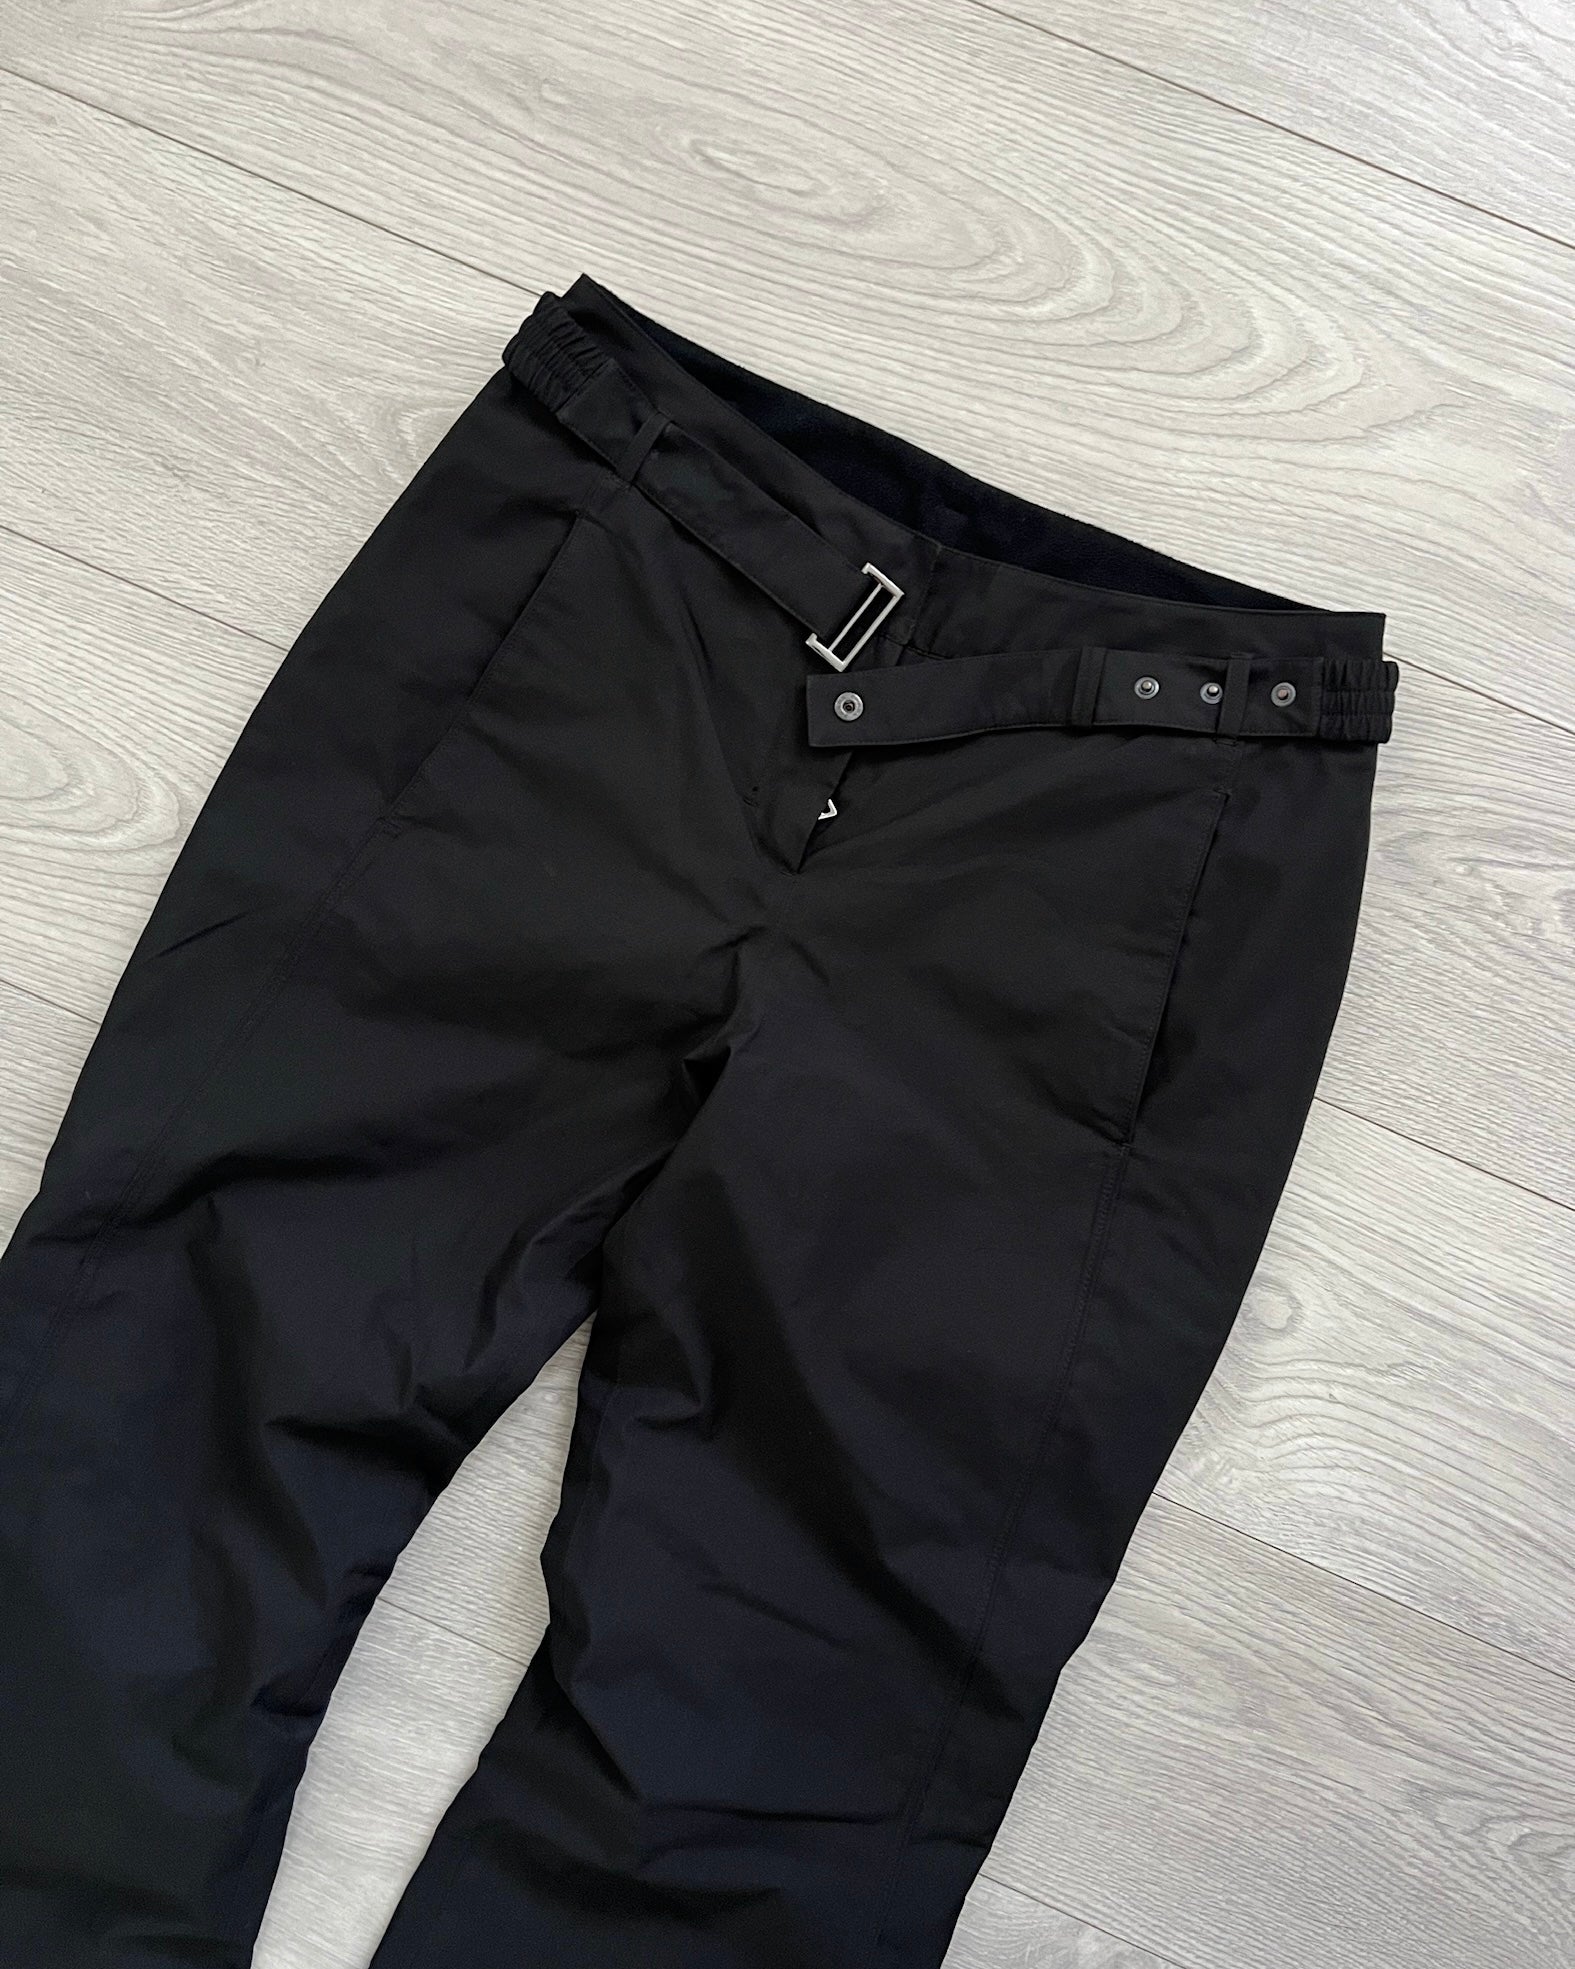 Prada Sport 00s Technical Gore-Tex Belted Insulated Pants - Size 